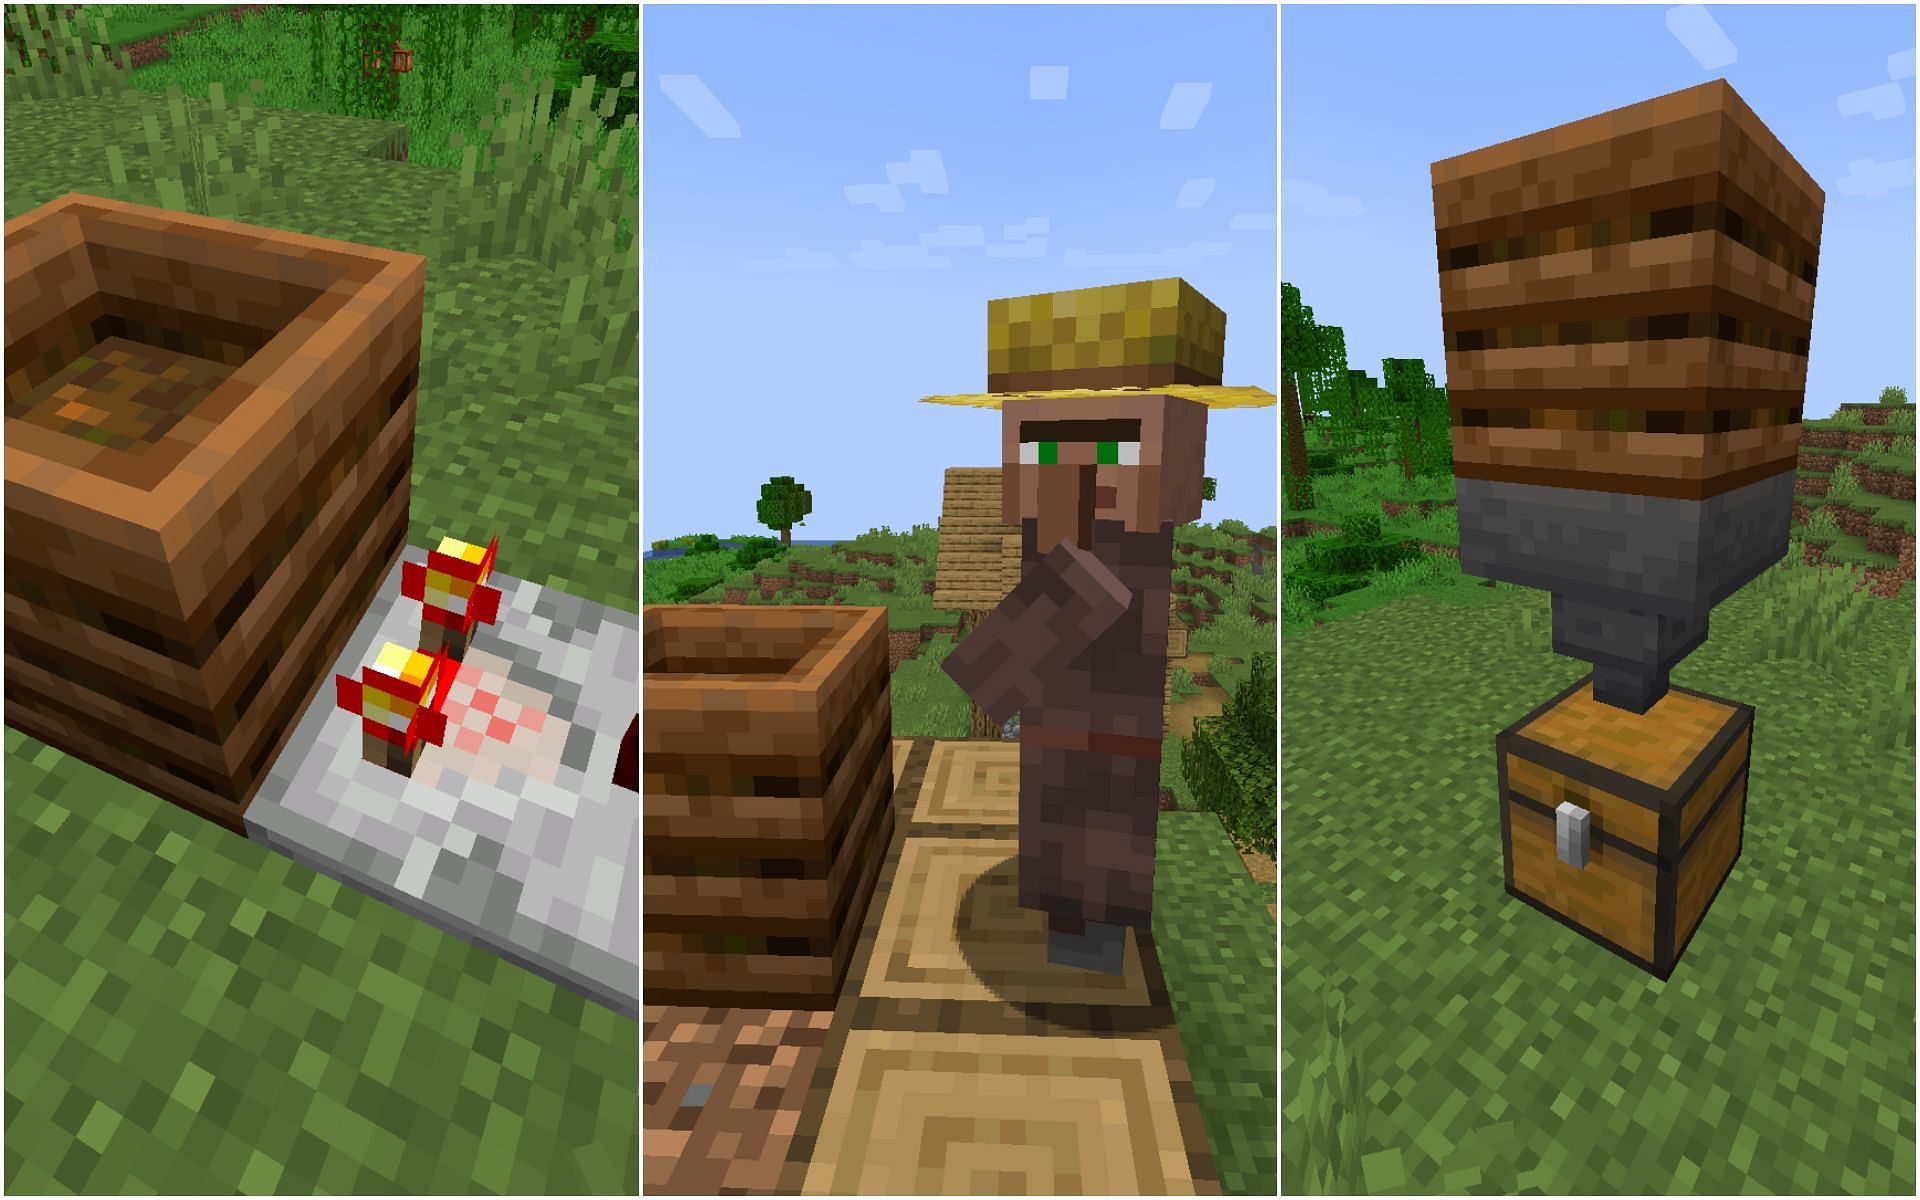 Several uses of a composter (Image via Minecraft 1.19 update)